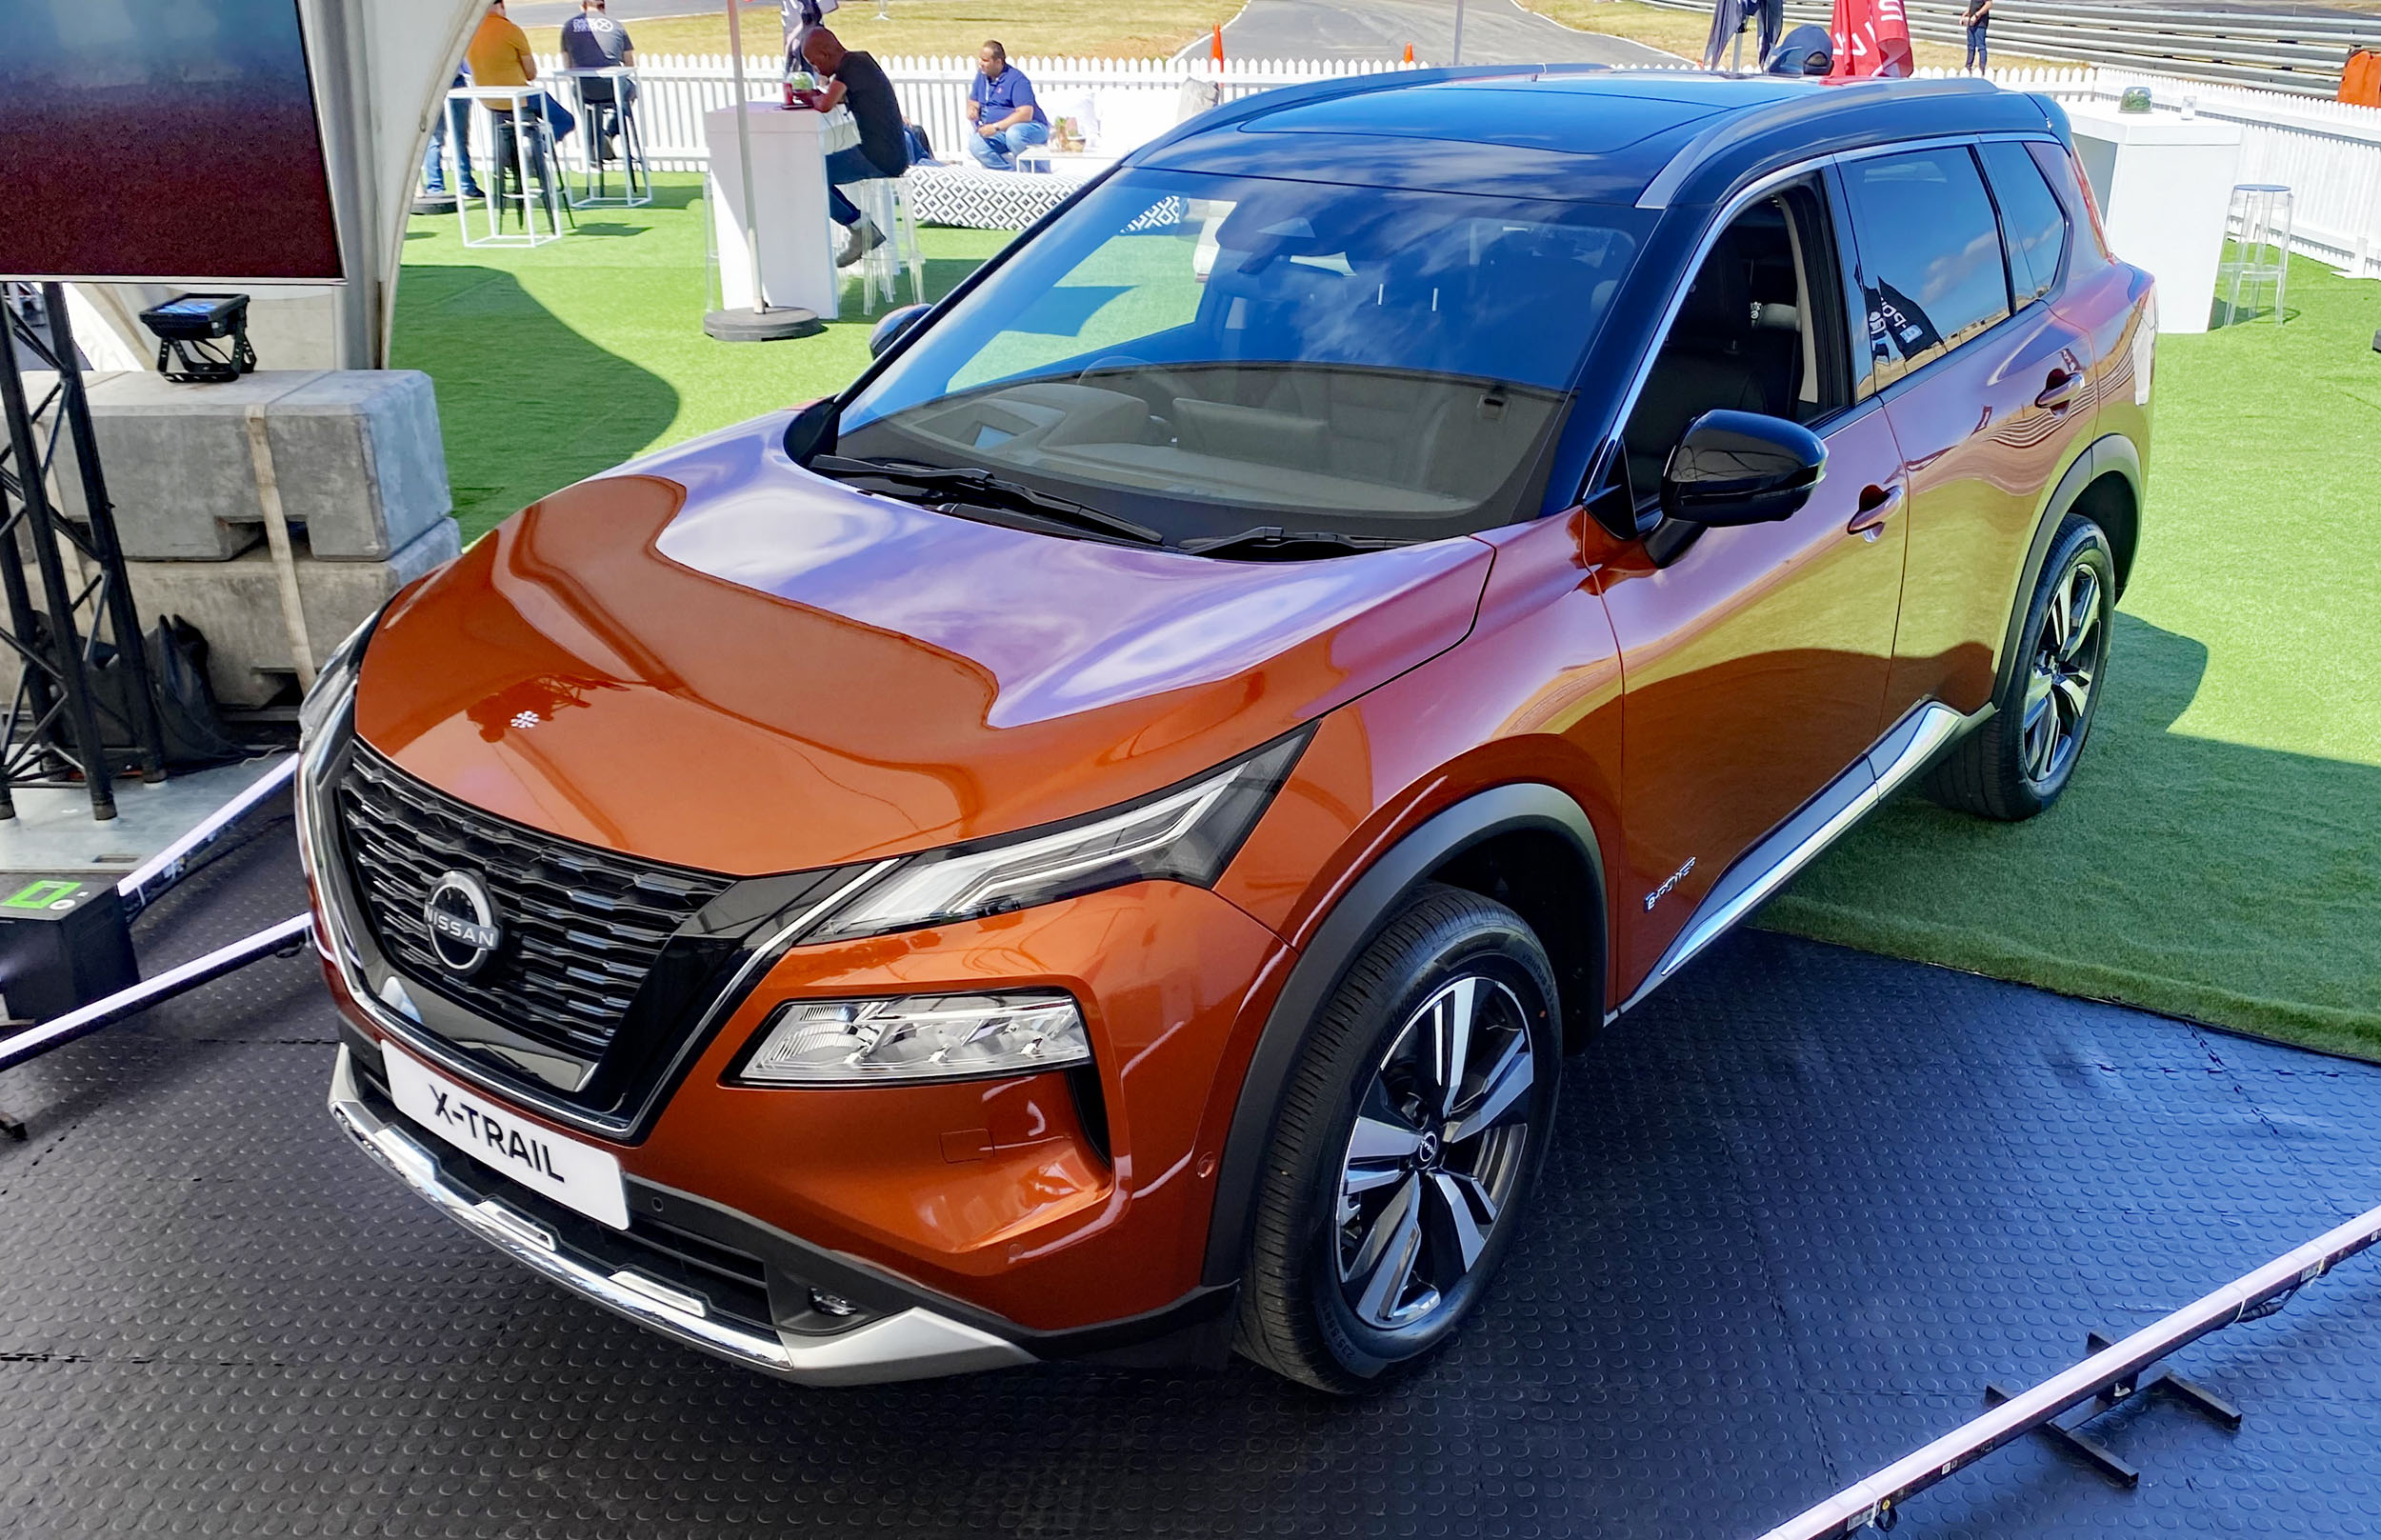 nissan, nissan e-power, nissan x-trail, new nissan x-trail coming to south africa – here’s your first look